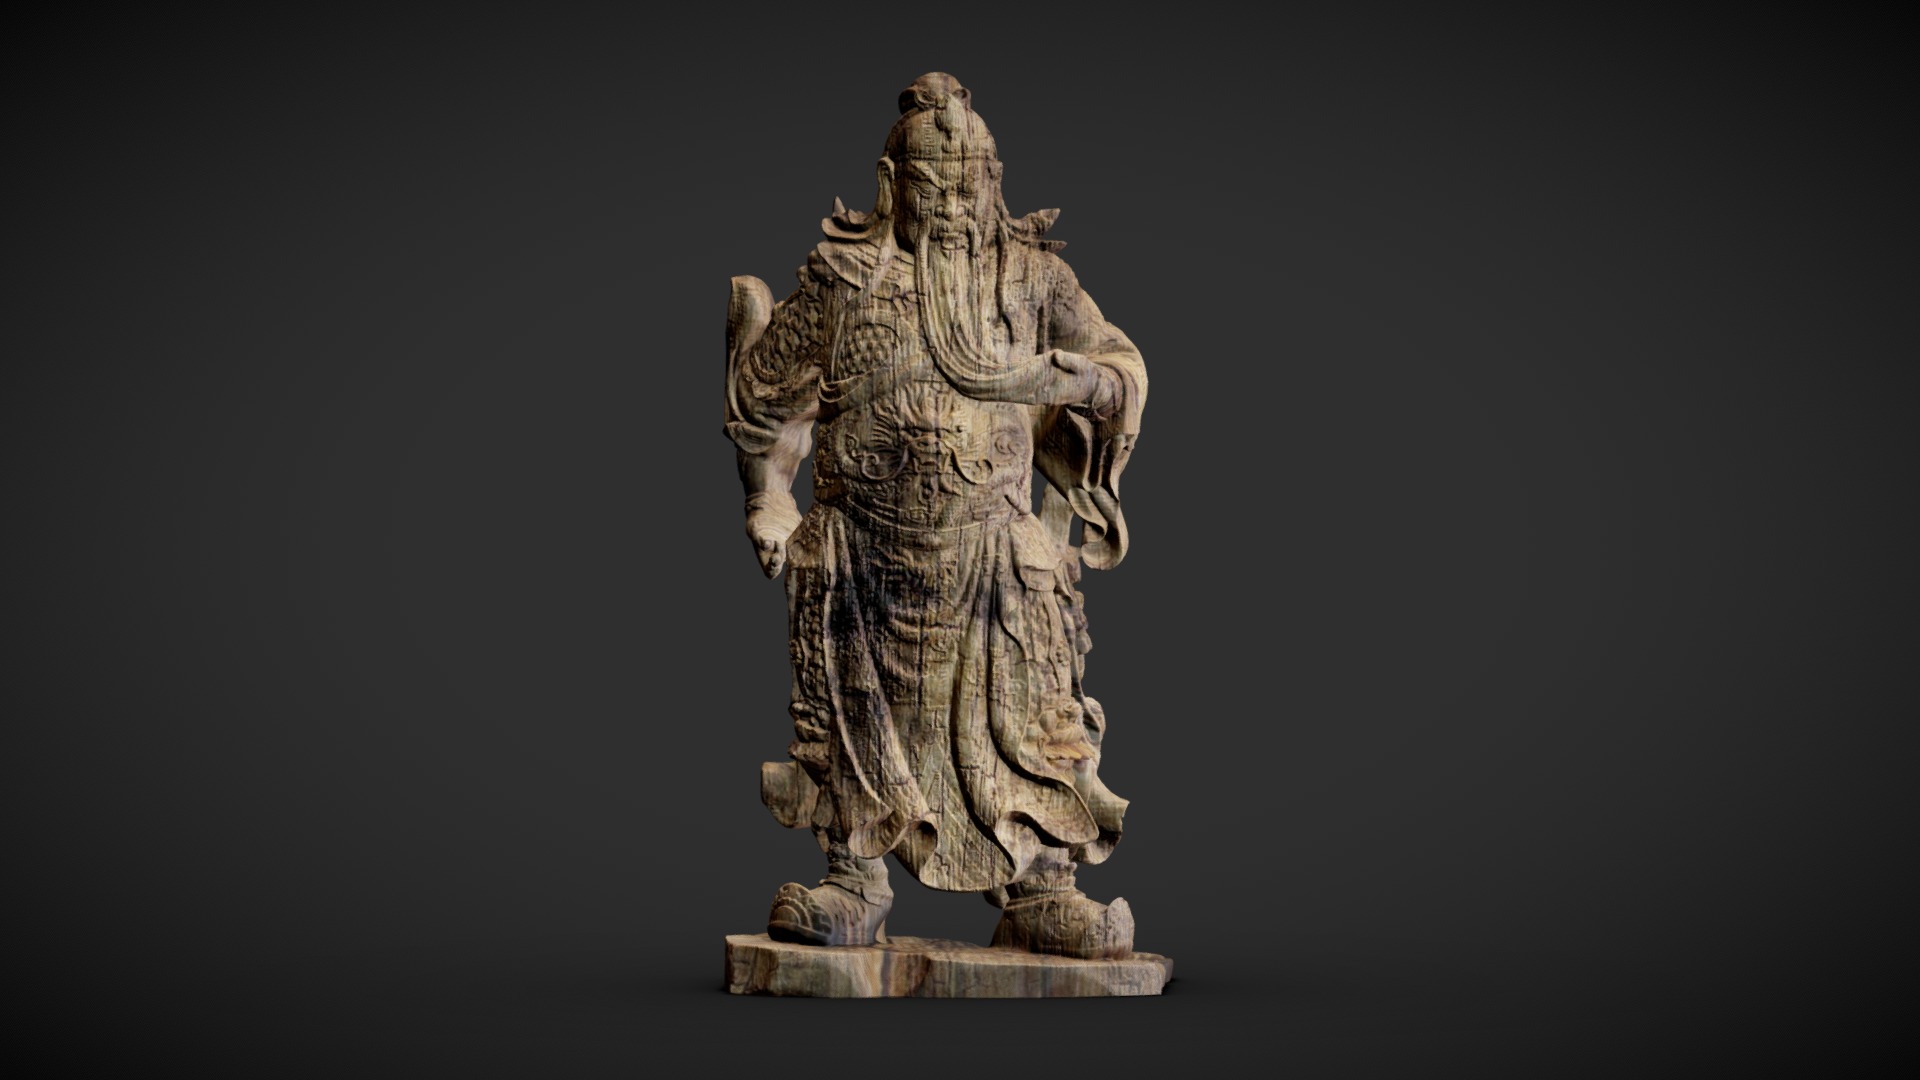 3D model Guan Yu dilapidated wood sculpture - This is a 3D model of the Guan Yu dilapidated wood sculpture. The 3D model is about a statue of a person with a sword.